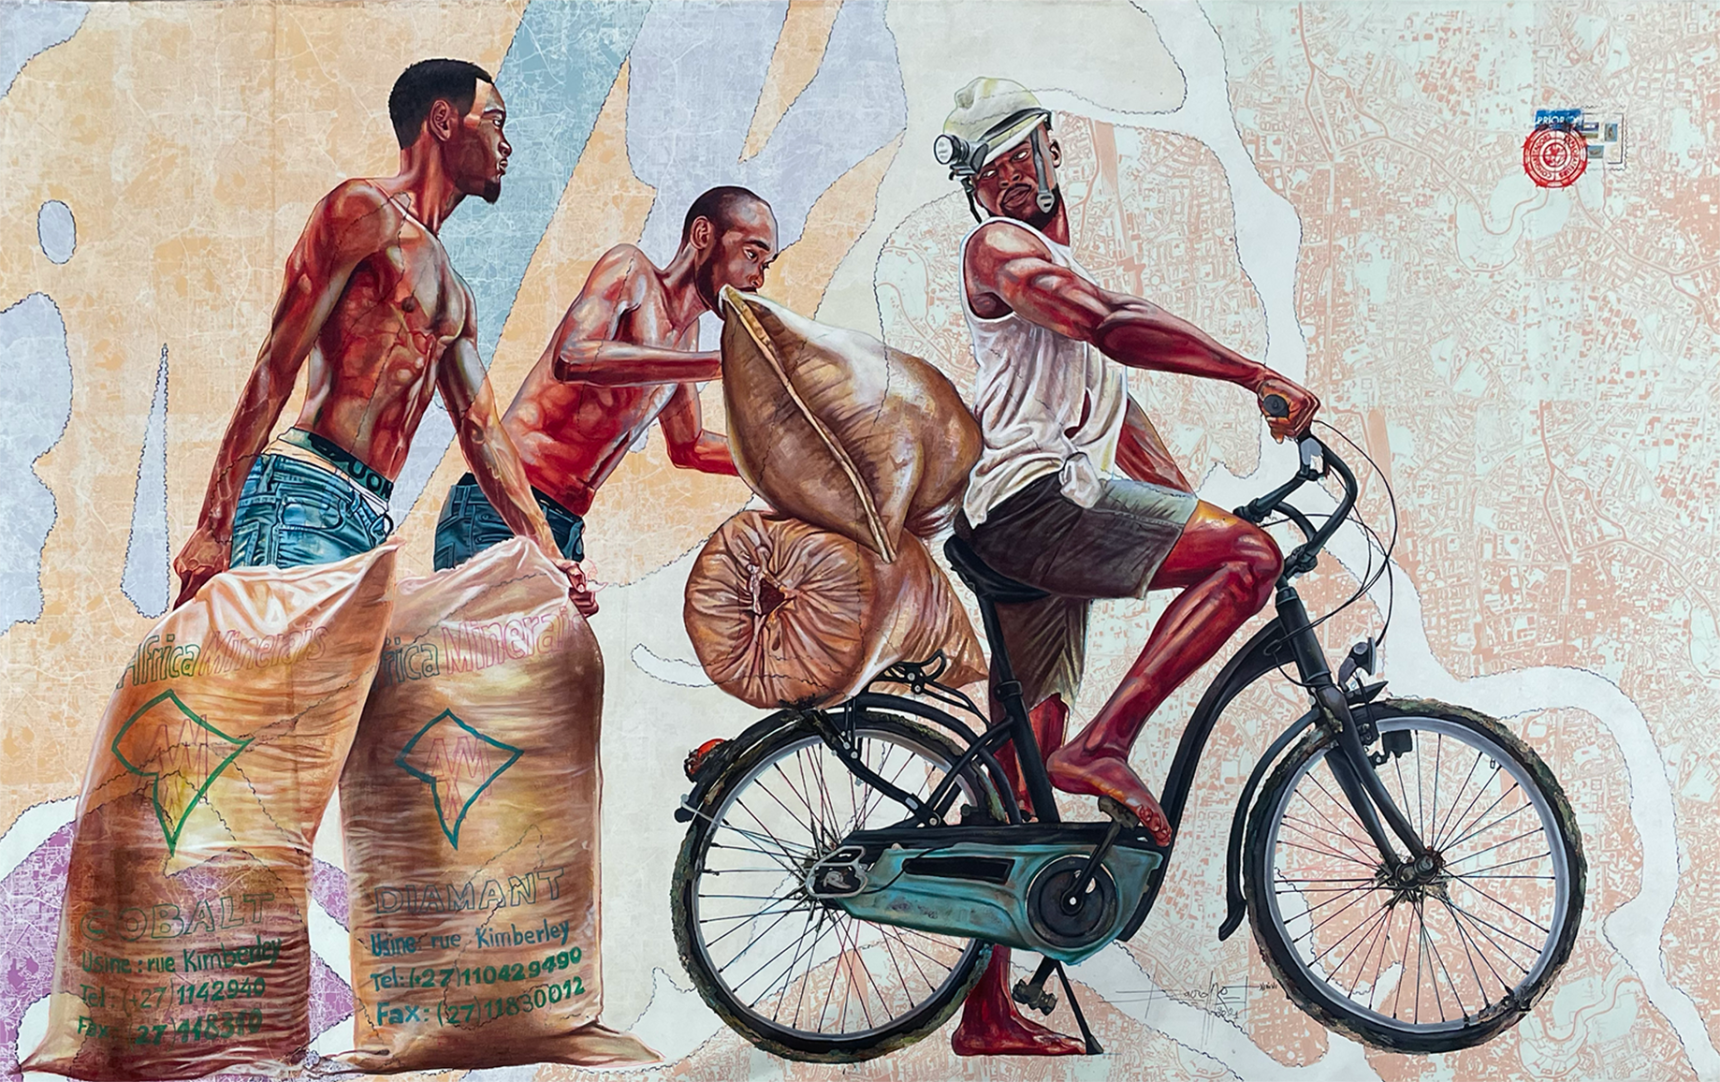 Jean David Nkot painting - one man on a bike carrying sacks and 2 men helping